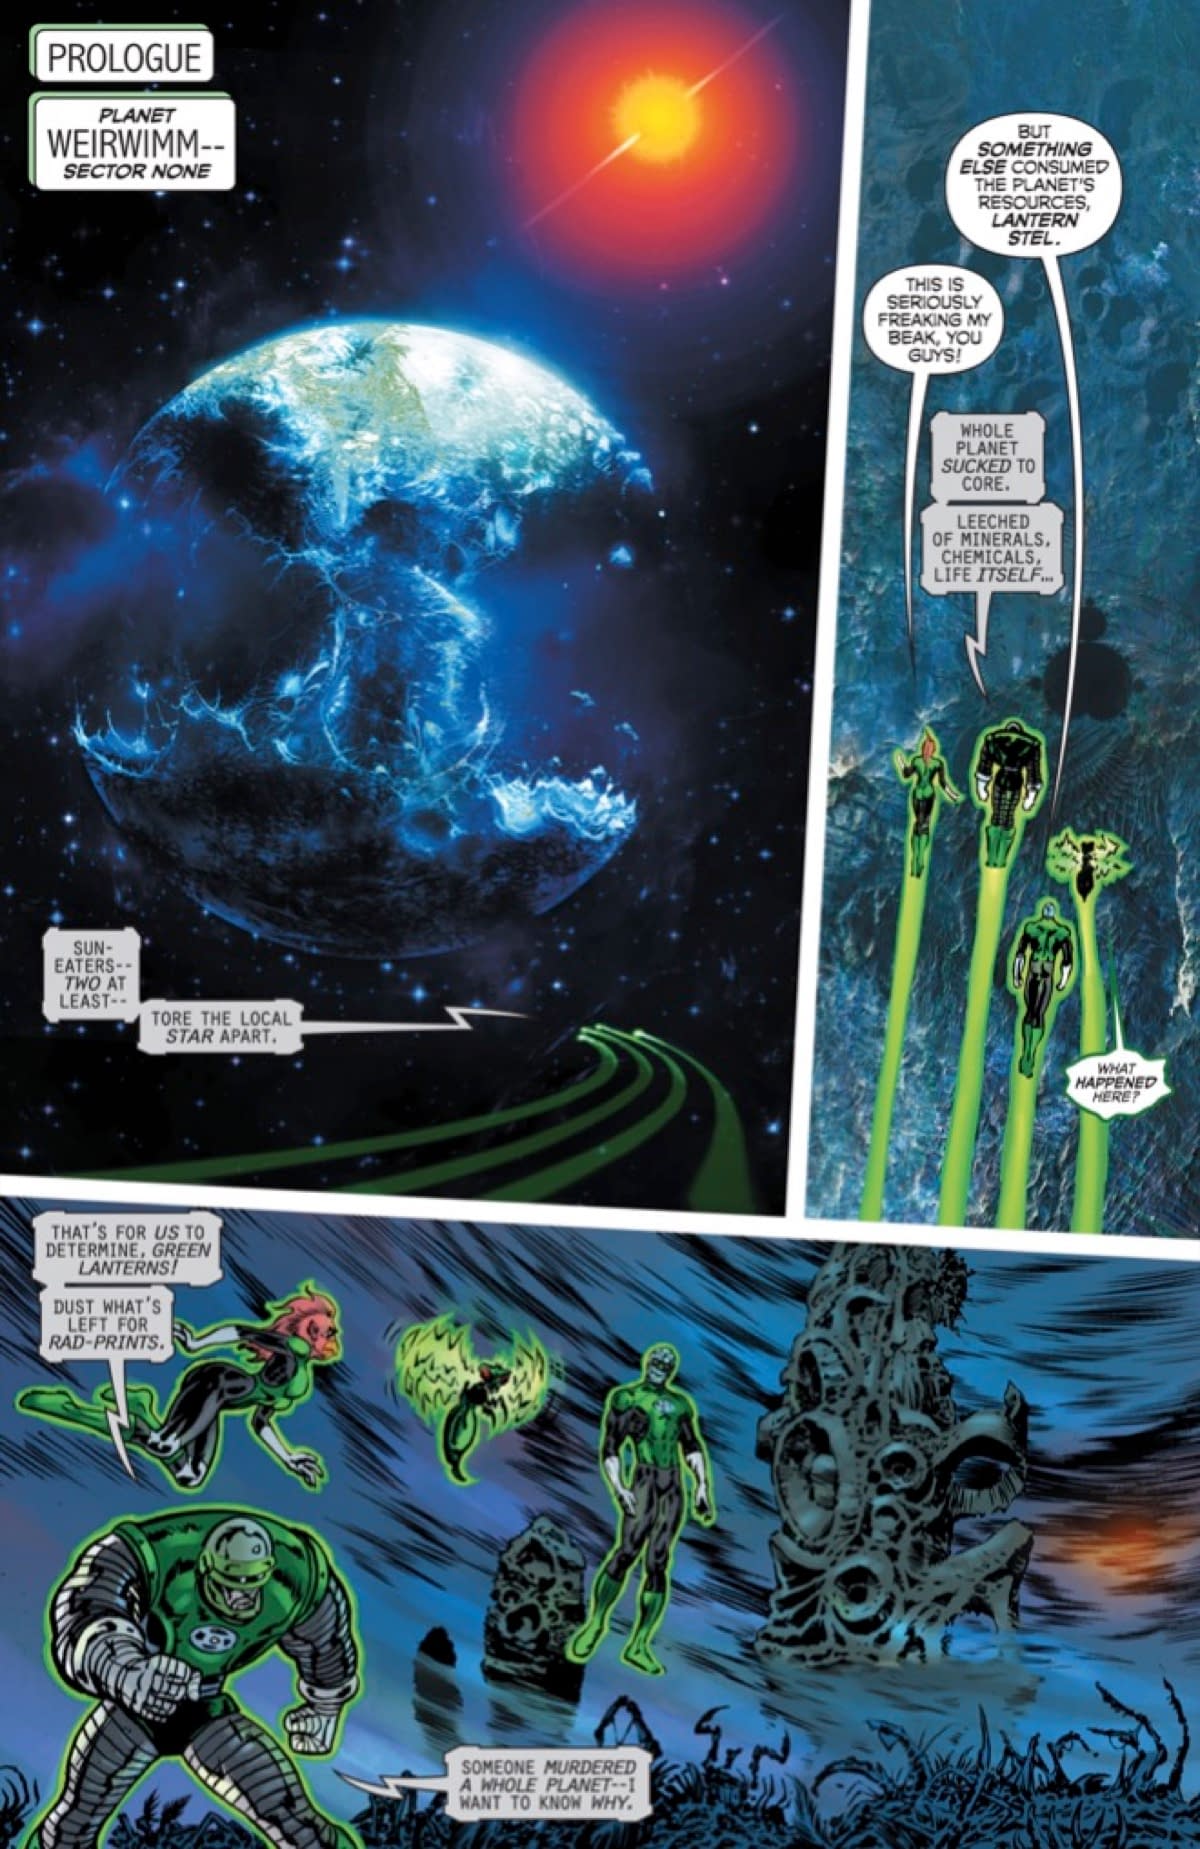 EXCLUSIVE The Green Lantern #11 Preview